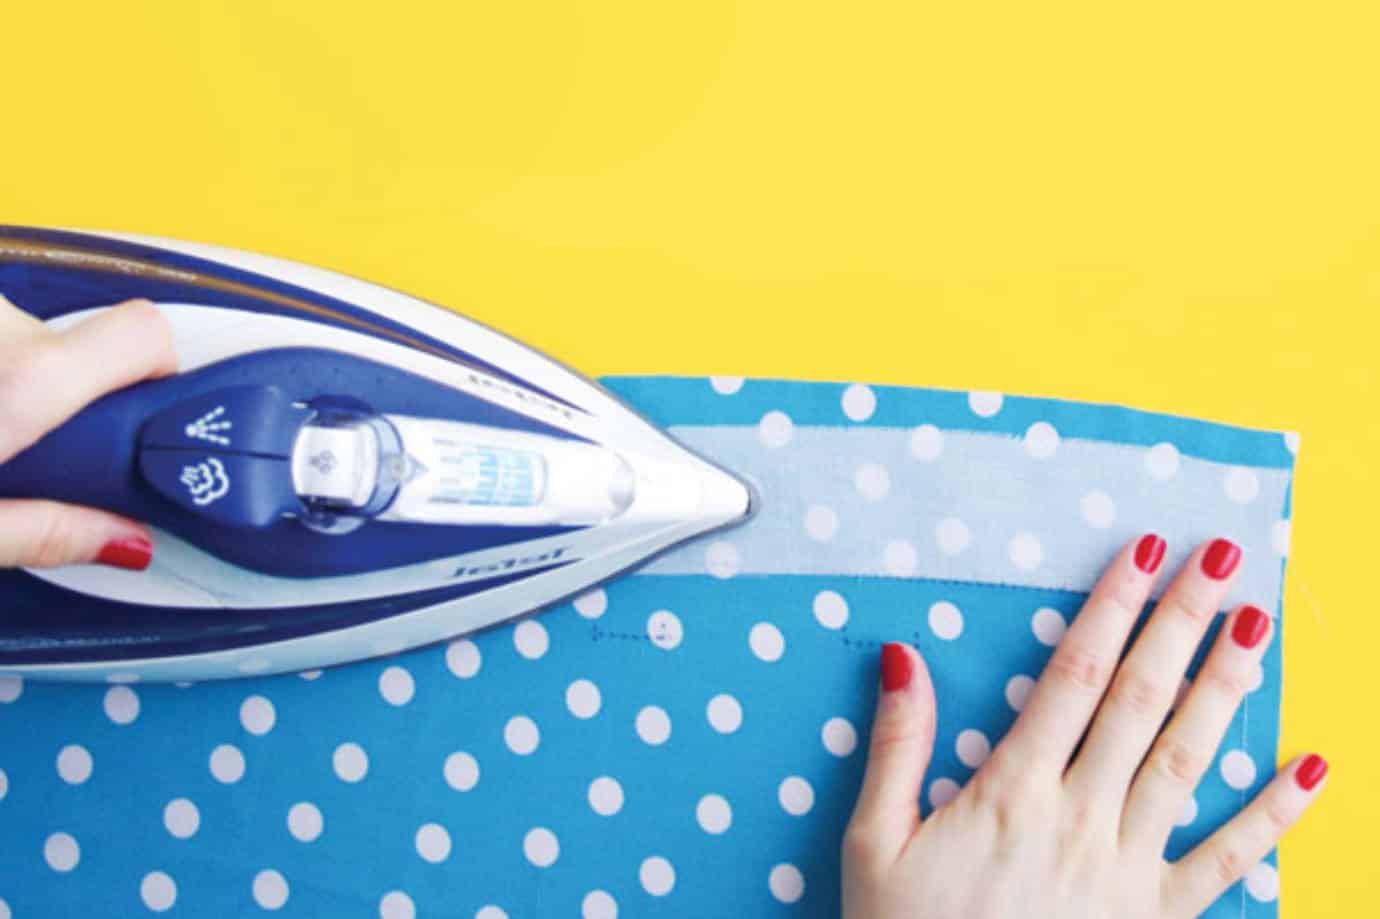 how to fix holes in clothes without sewing